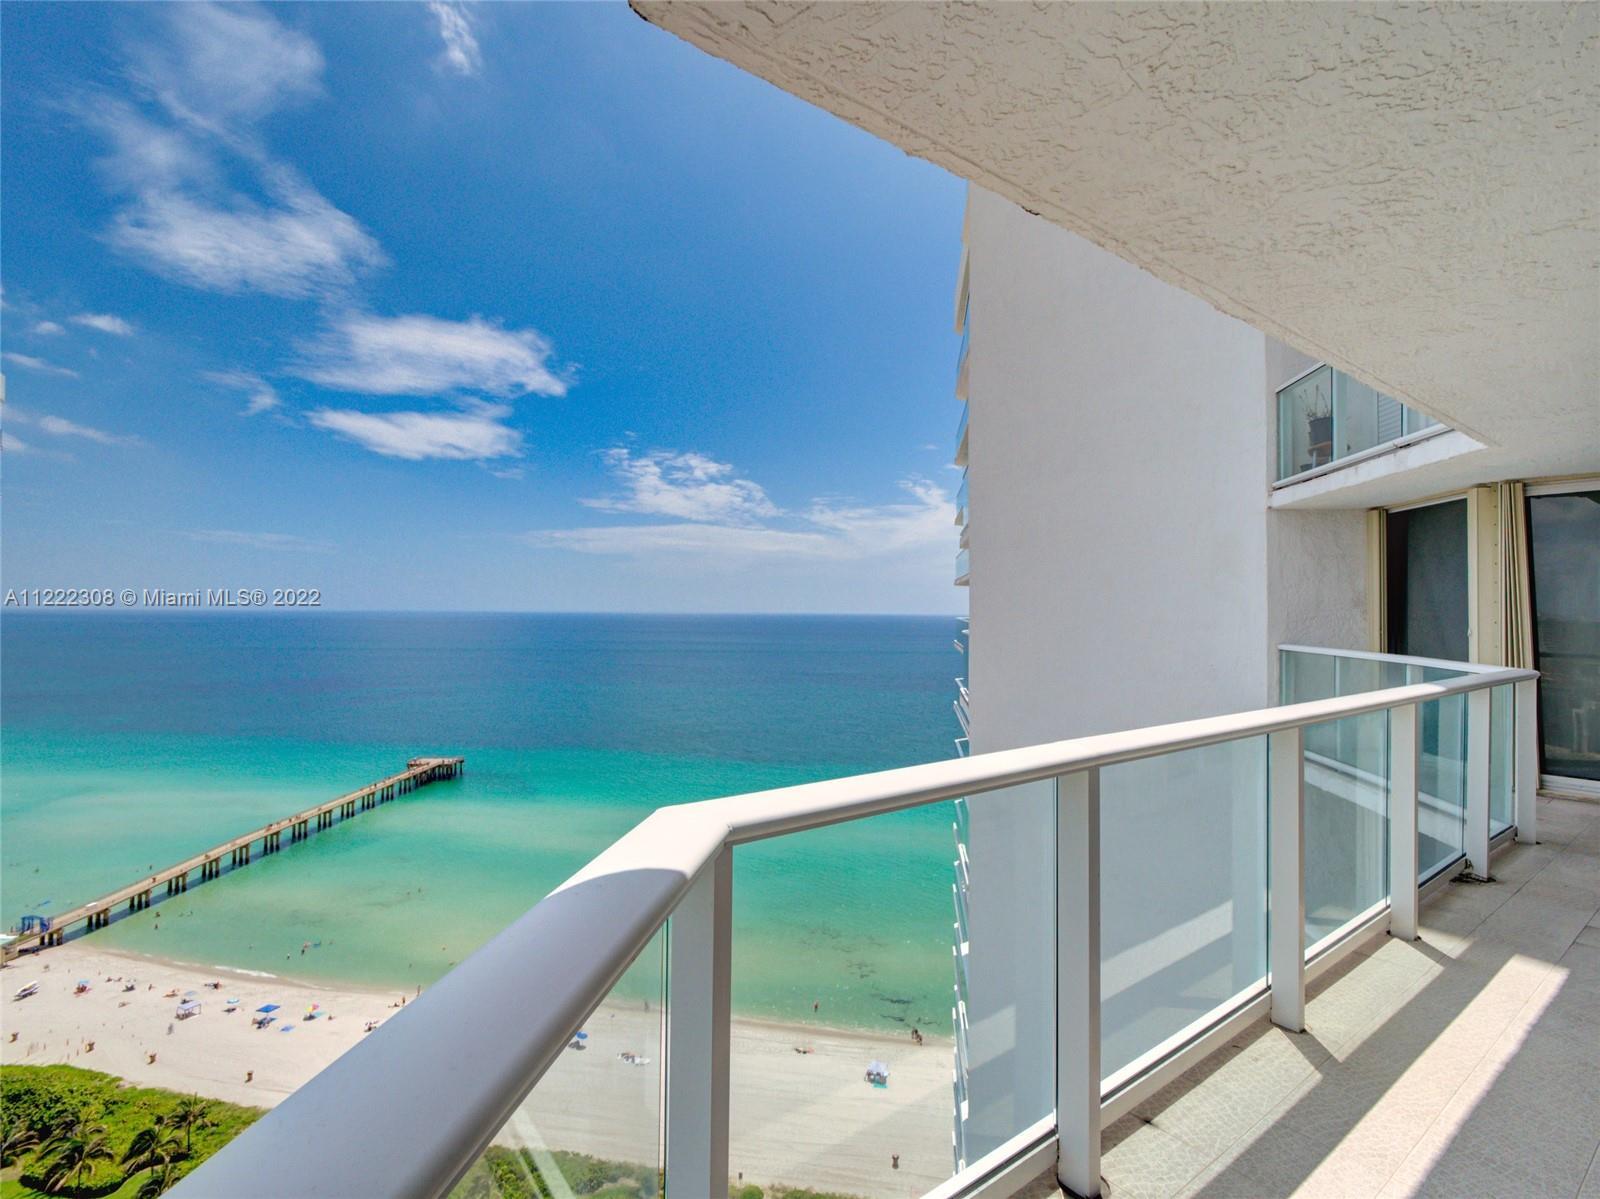 Oceanfront living experience 2 Beds, 2 Baths Plus den with 1,760 SQFT. The modern unit faces the Oce